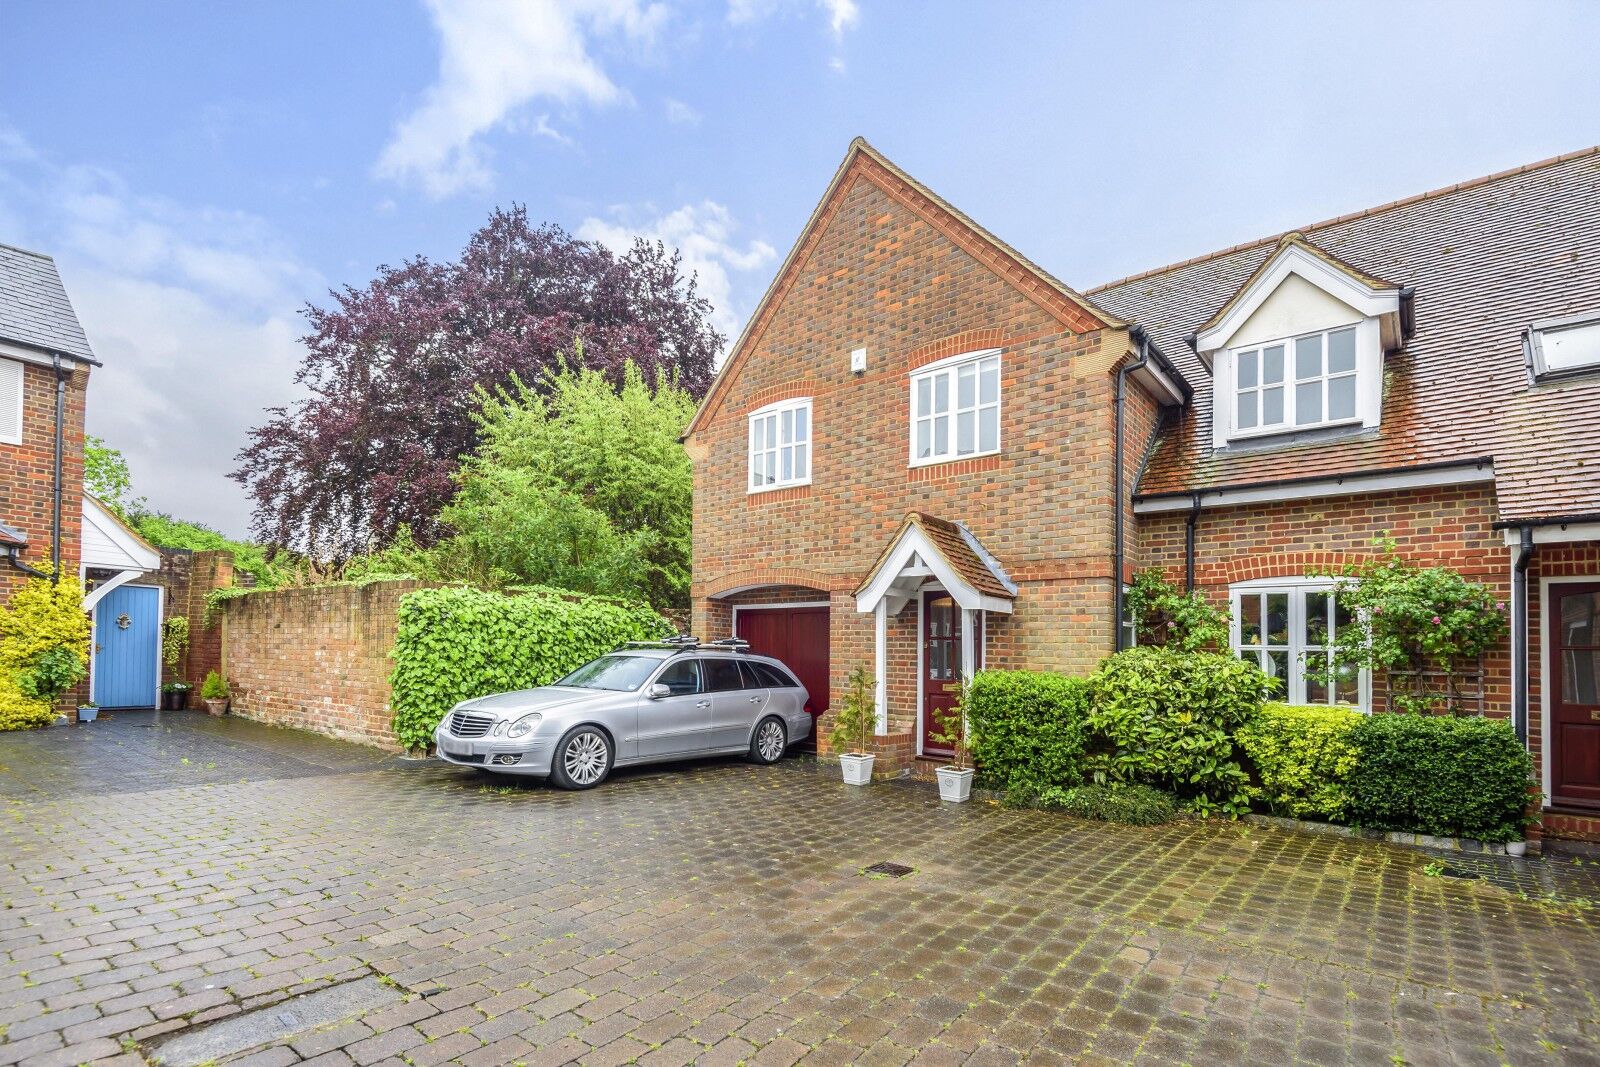 3 bedroom semi detached house for sale Bell Street Mews, Henley On Thames, RG9, main image